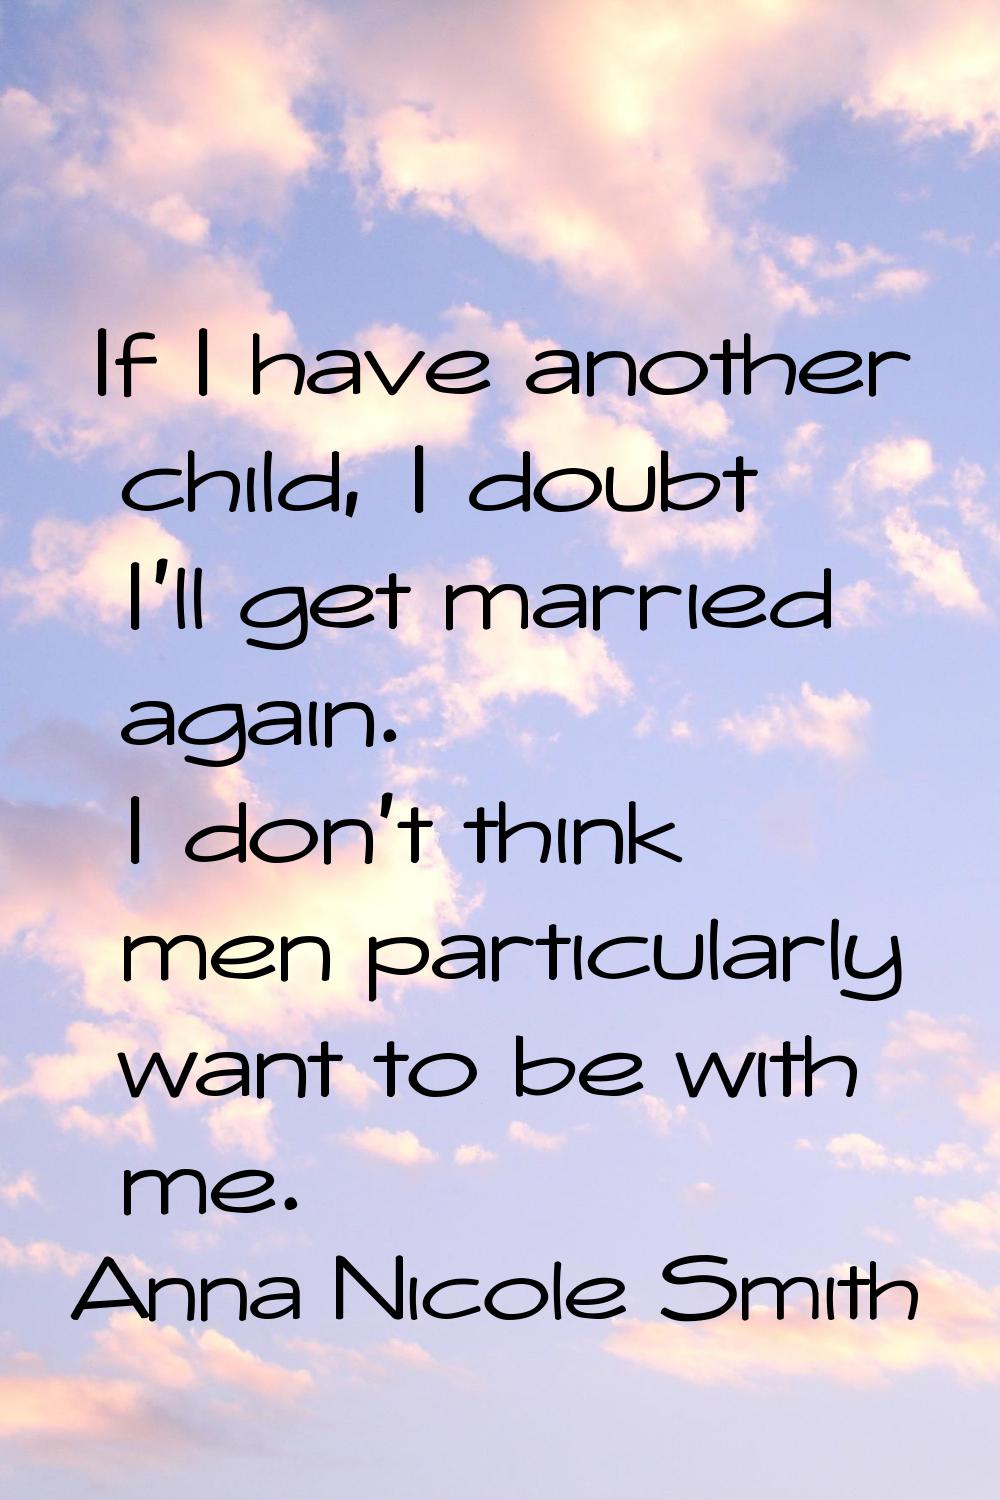 If I have another child, I doubt I'll get married again. I don't think men particularly want to be 